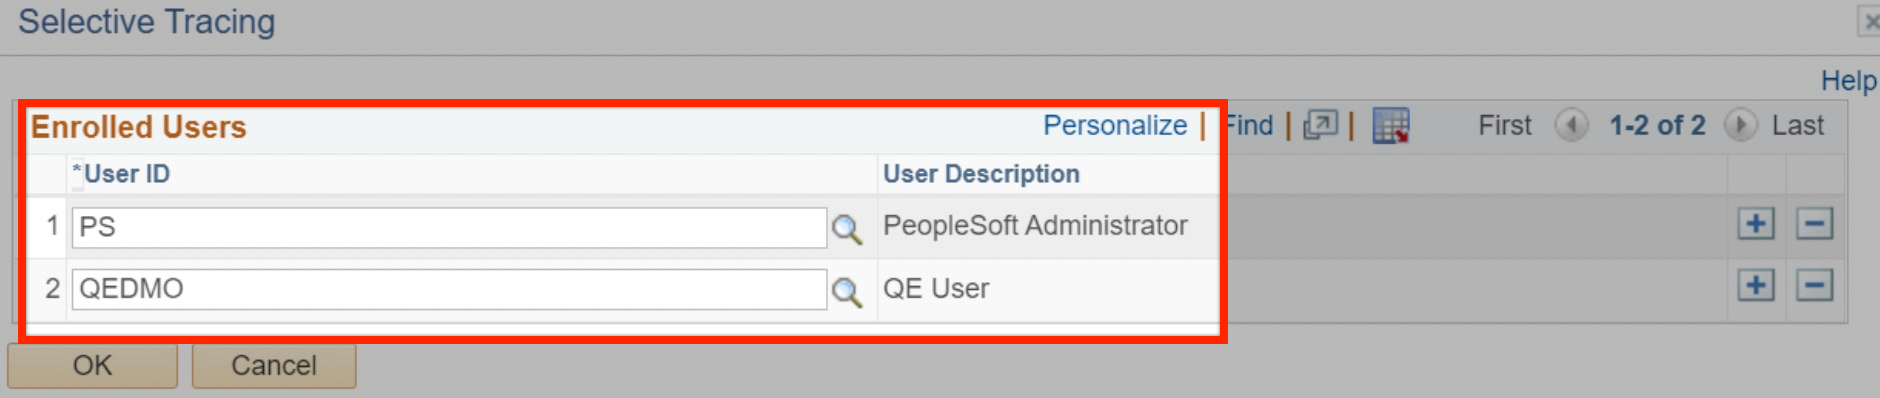 Enrolled users in selective tracing admin